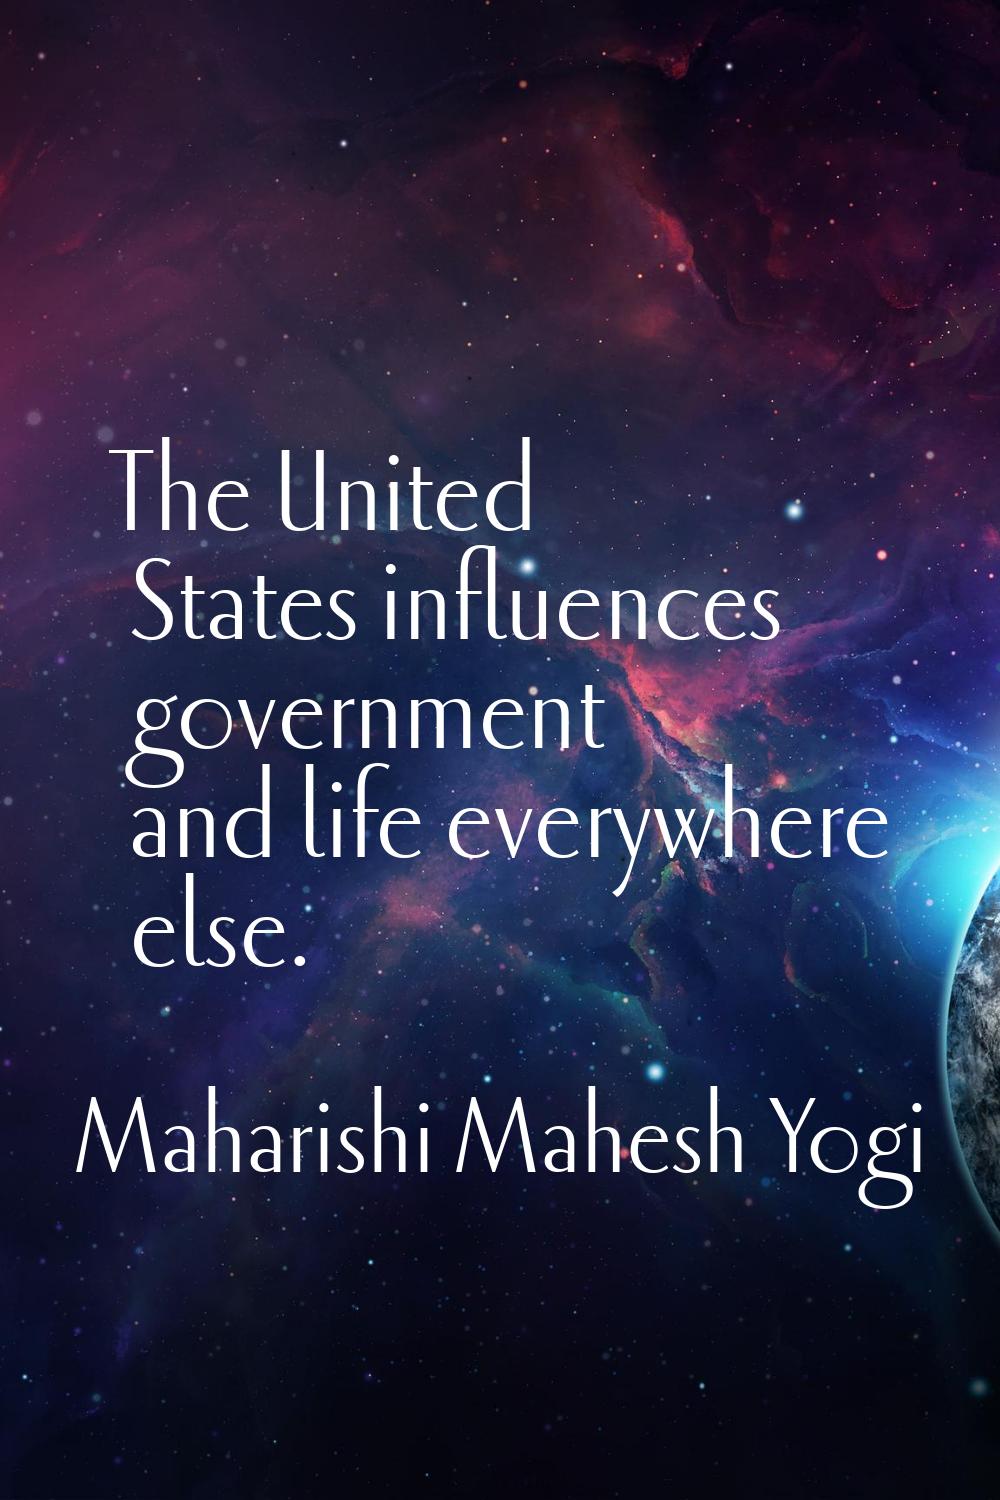 The United States influences government and life everywhere else.